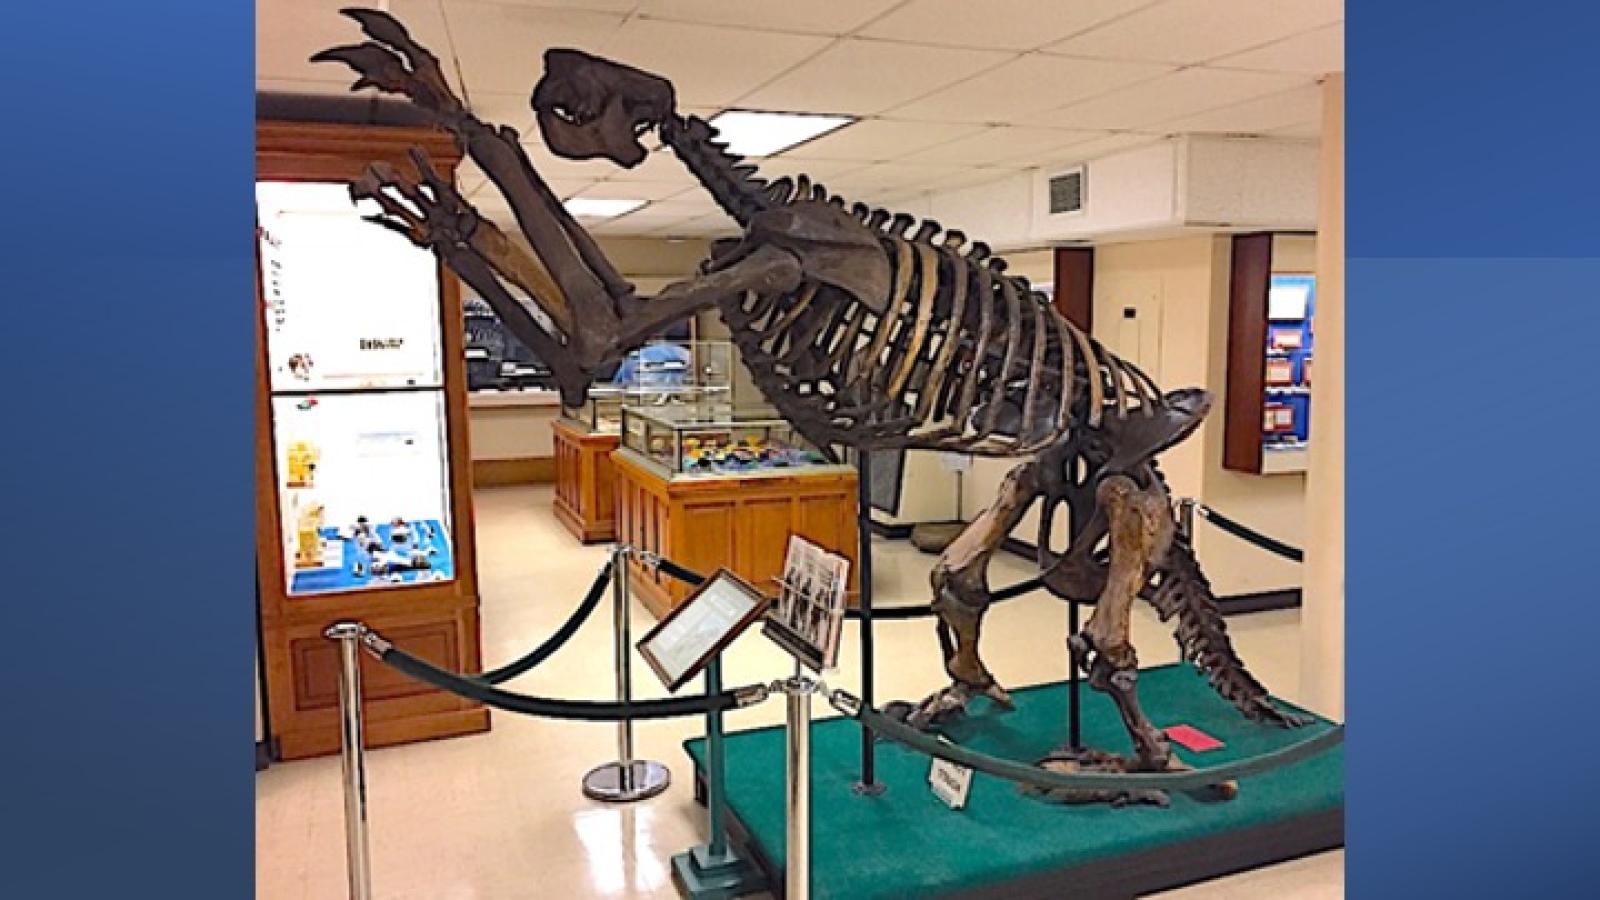 Megalonyx jeffersonii at the Orton Geological Museum